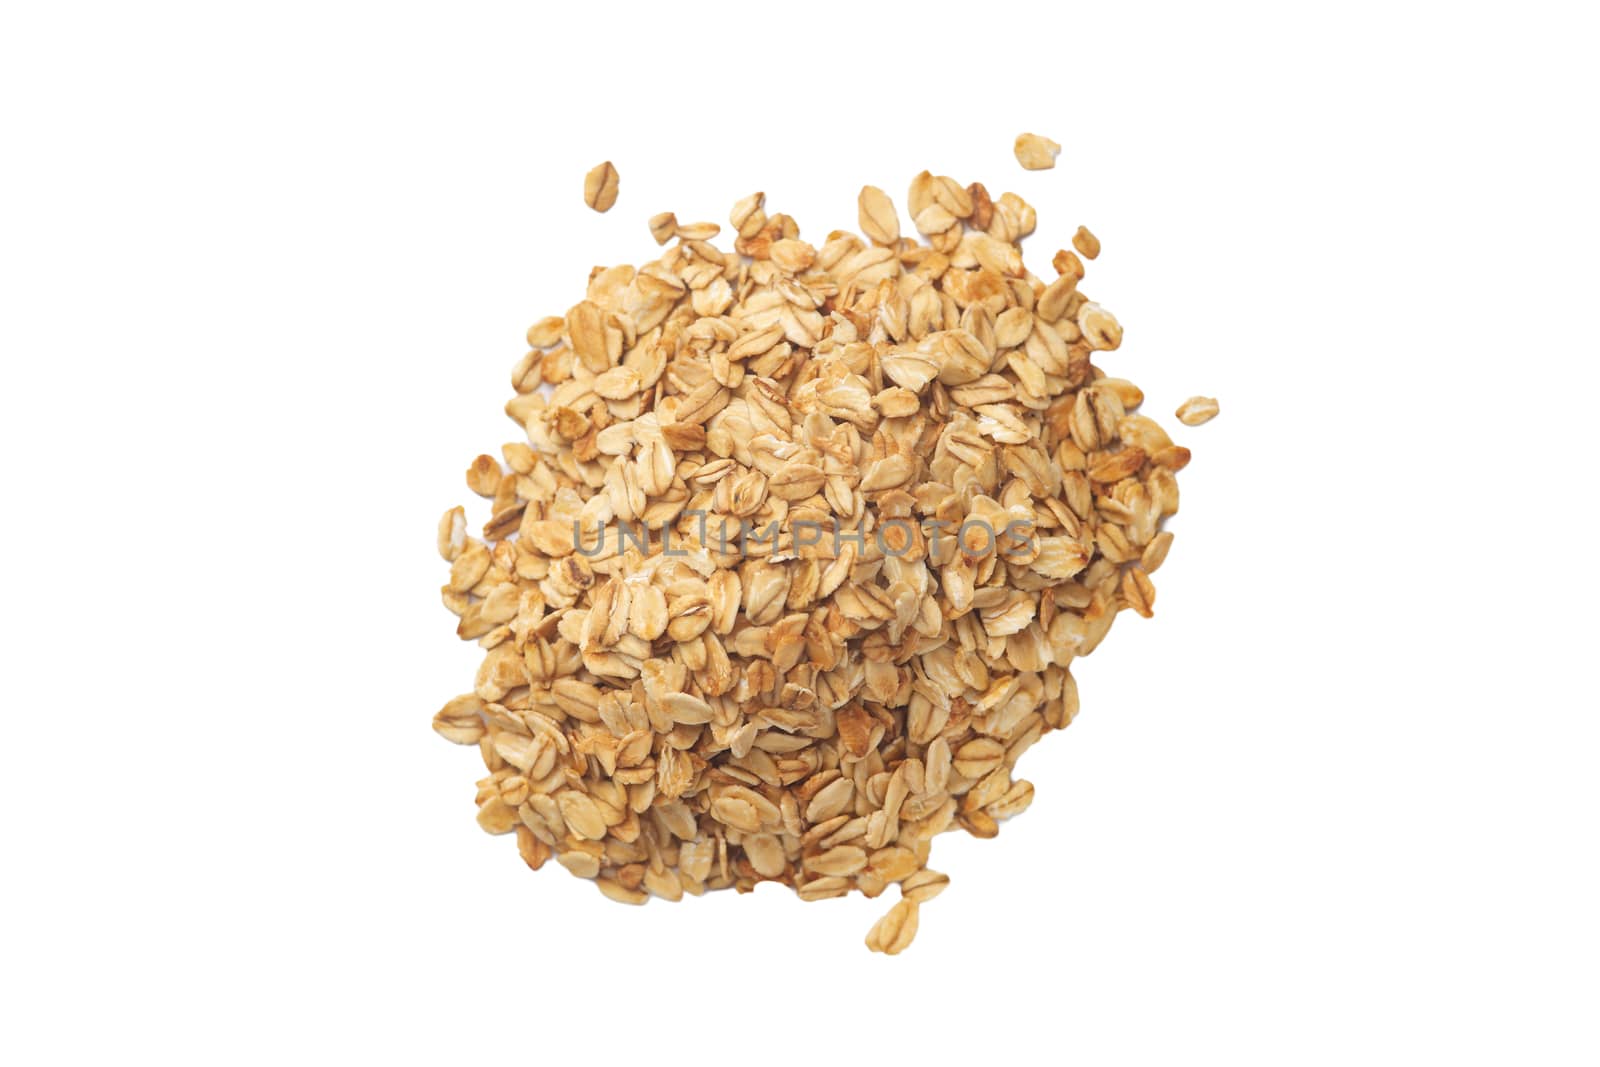 A bunch of cereal granola flakes isolated on white background.  by alexsdriver